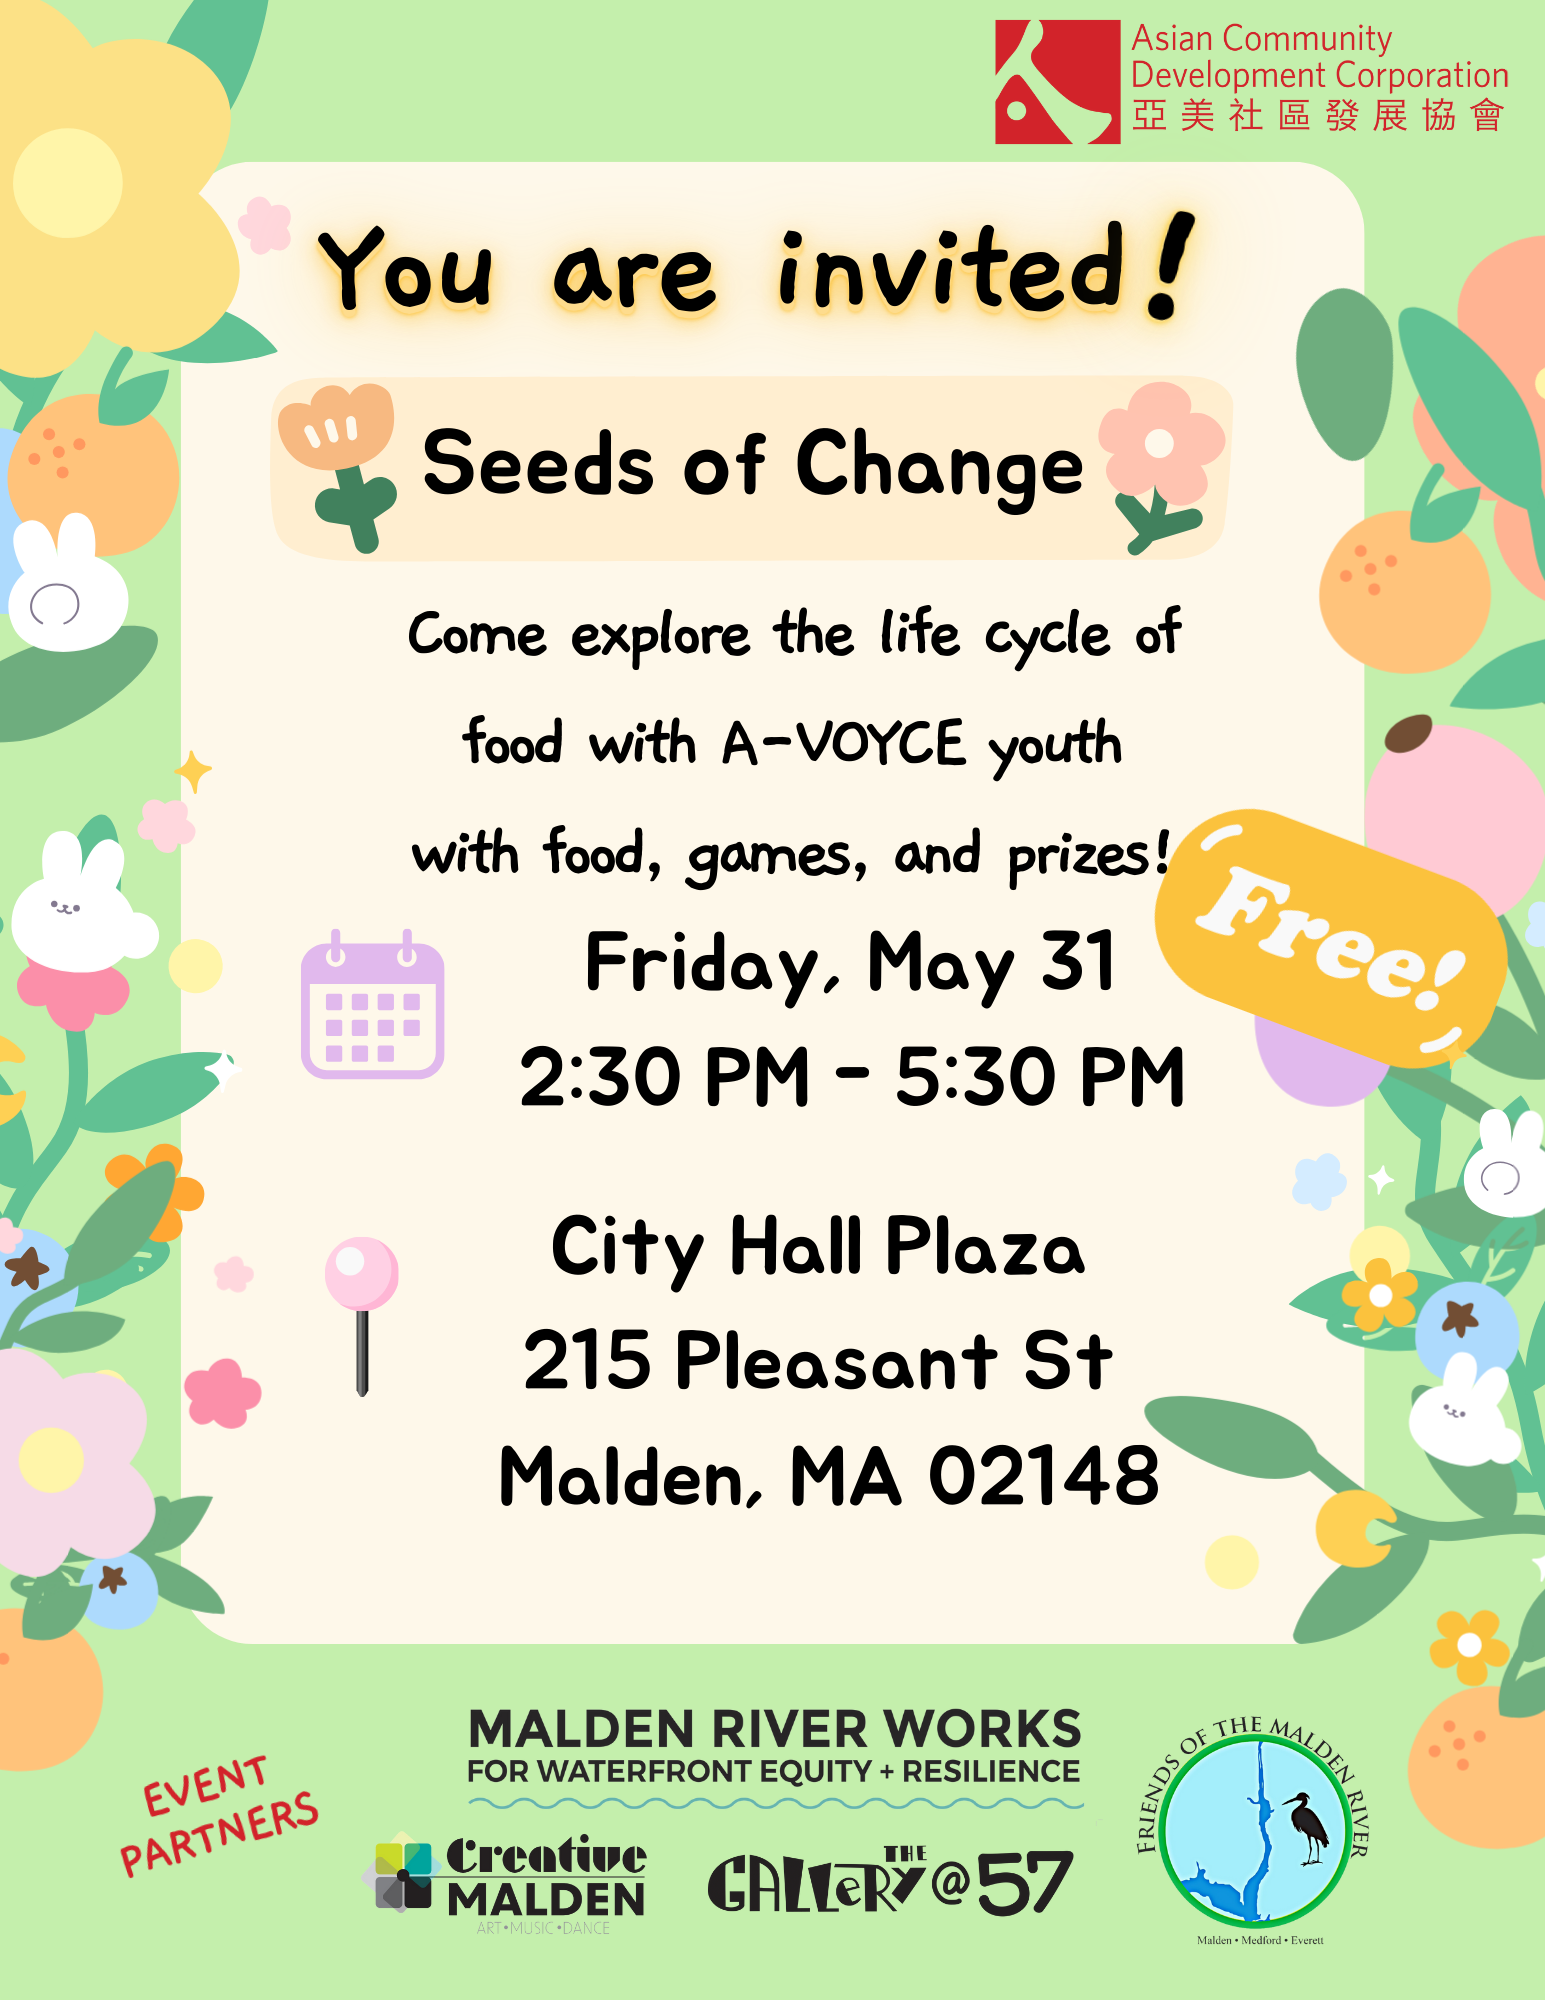 Poster describing the event details with graphics of garden in pale green.